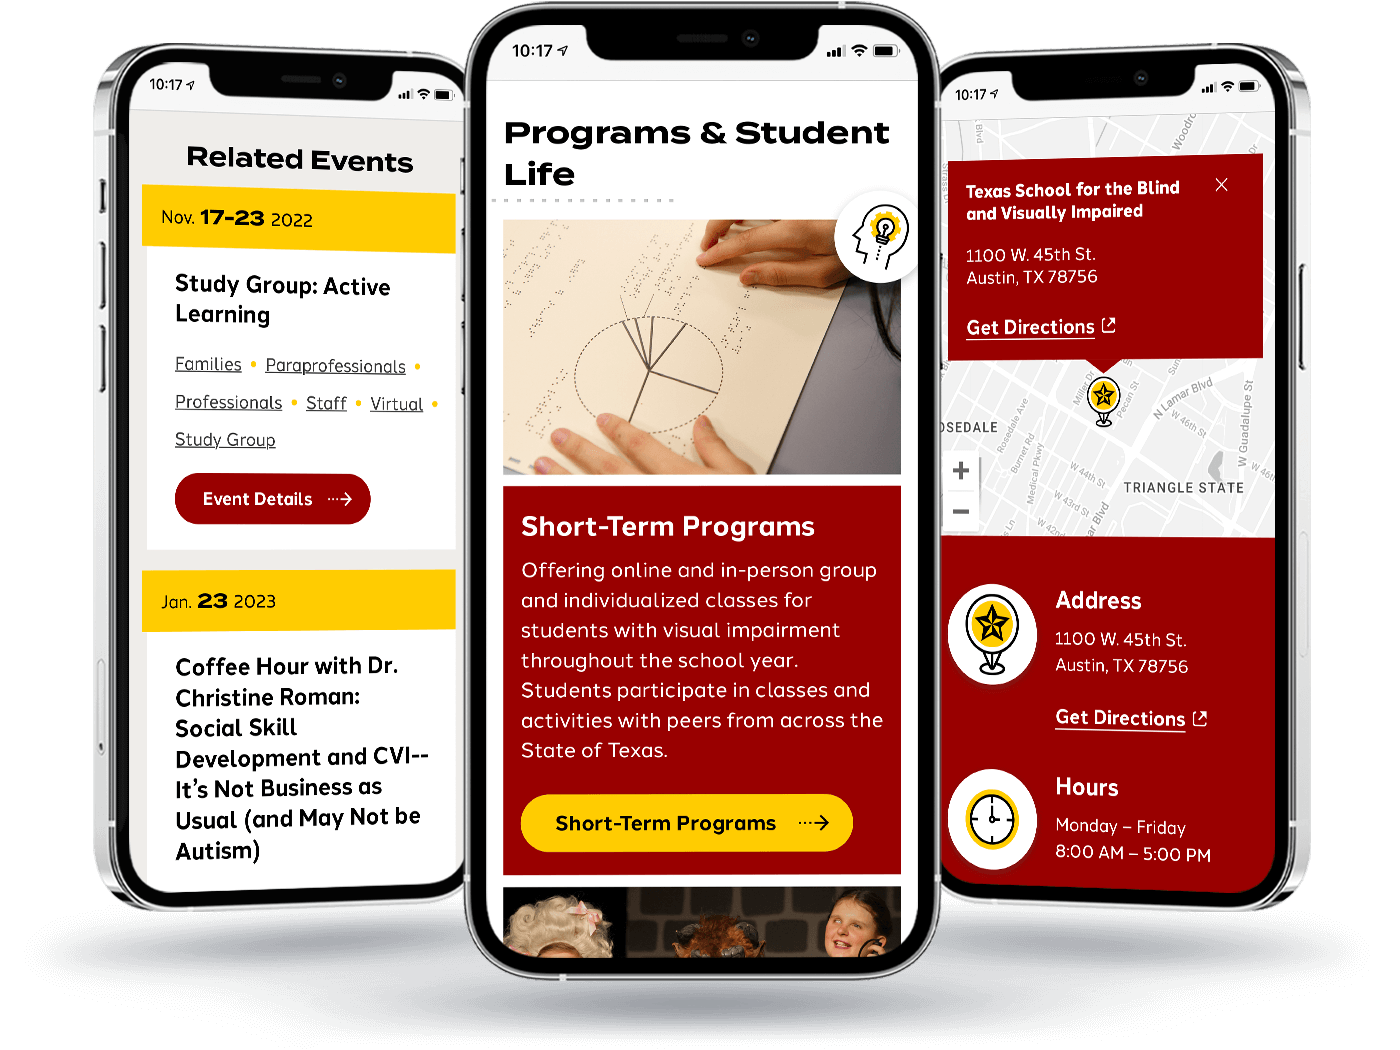 mobile view of related events, programs, and contact information